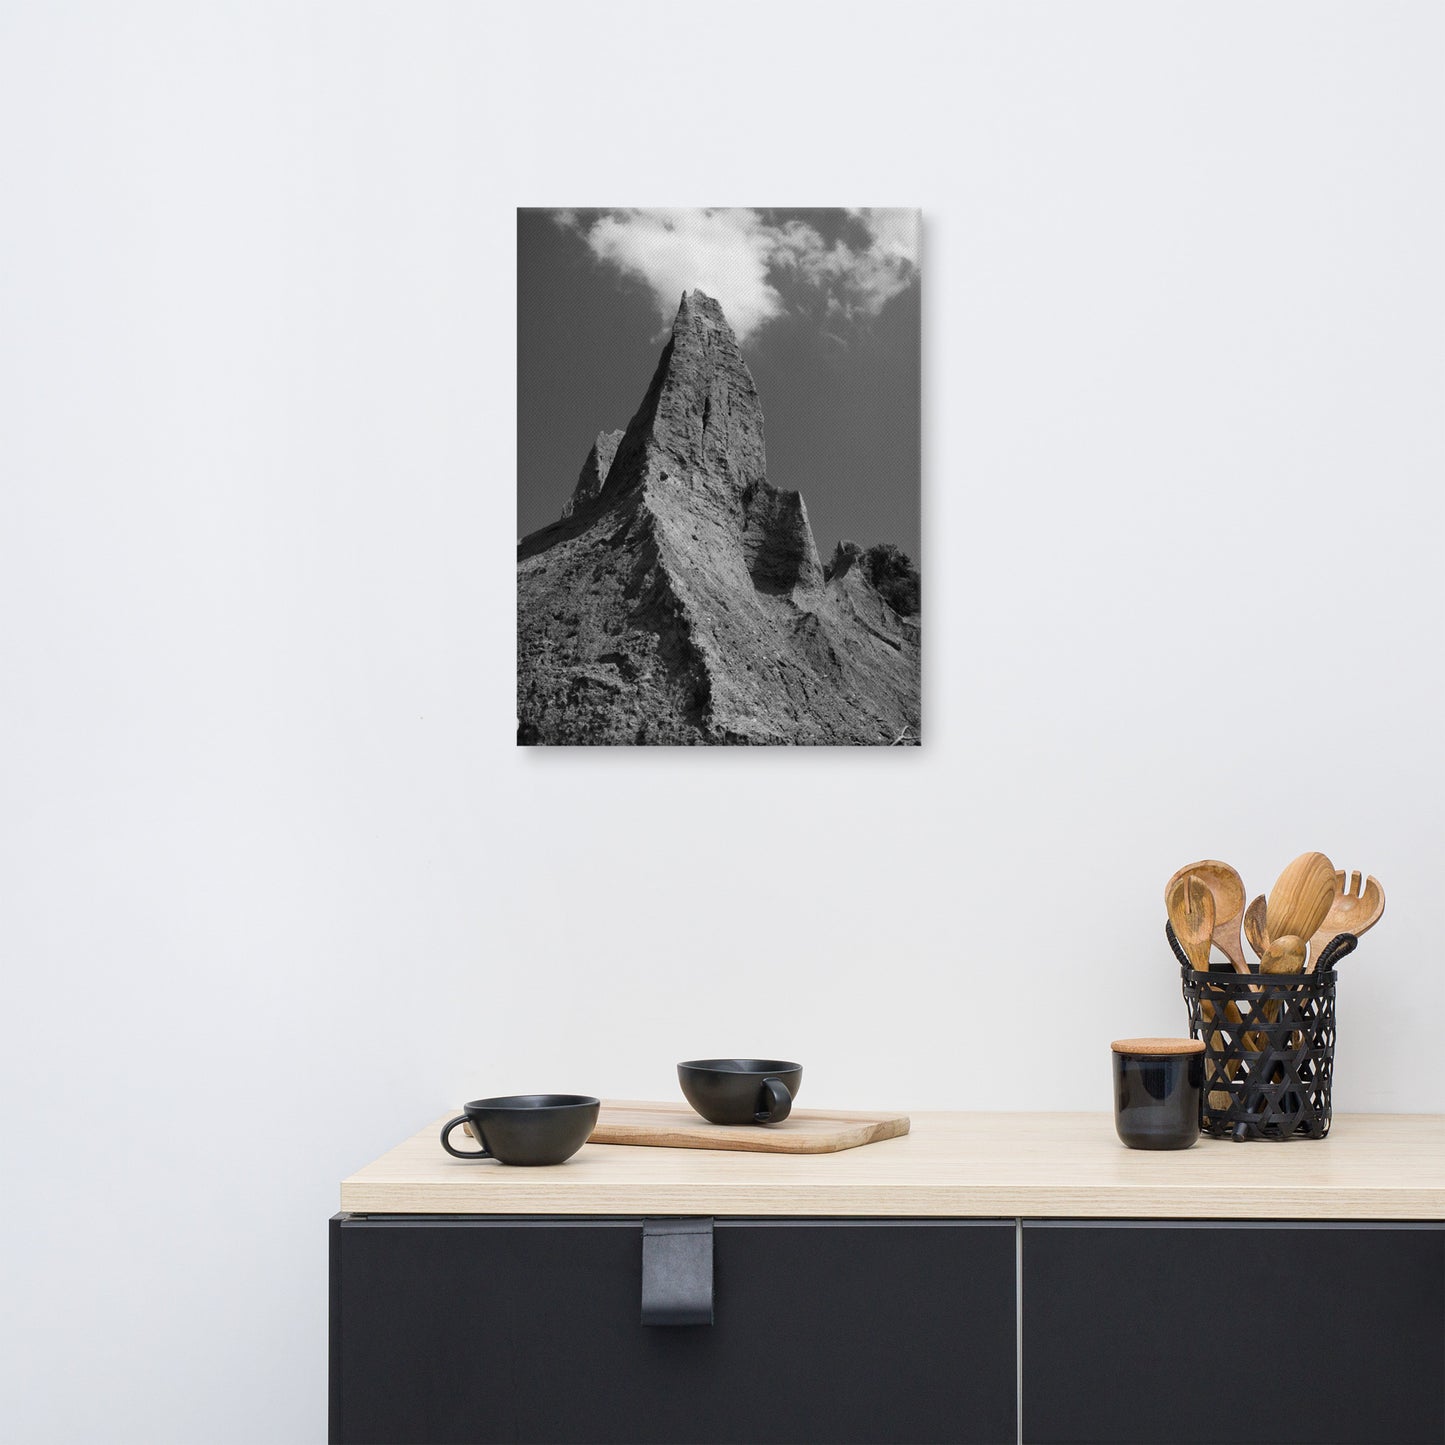 Chimney Bluff in Black and White Rural Landscape Canvas Wall Art Prints